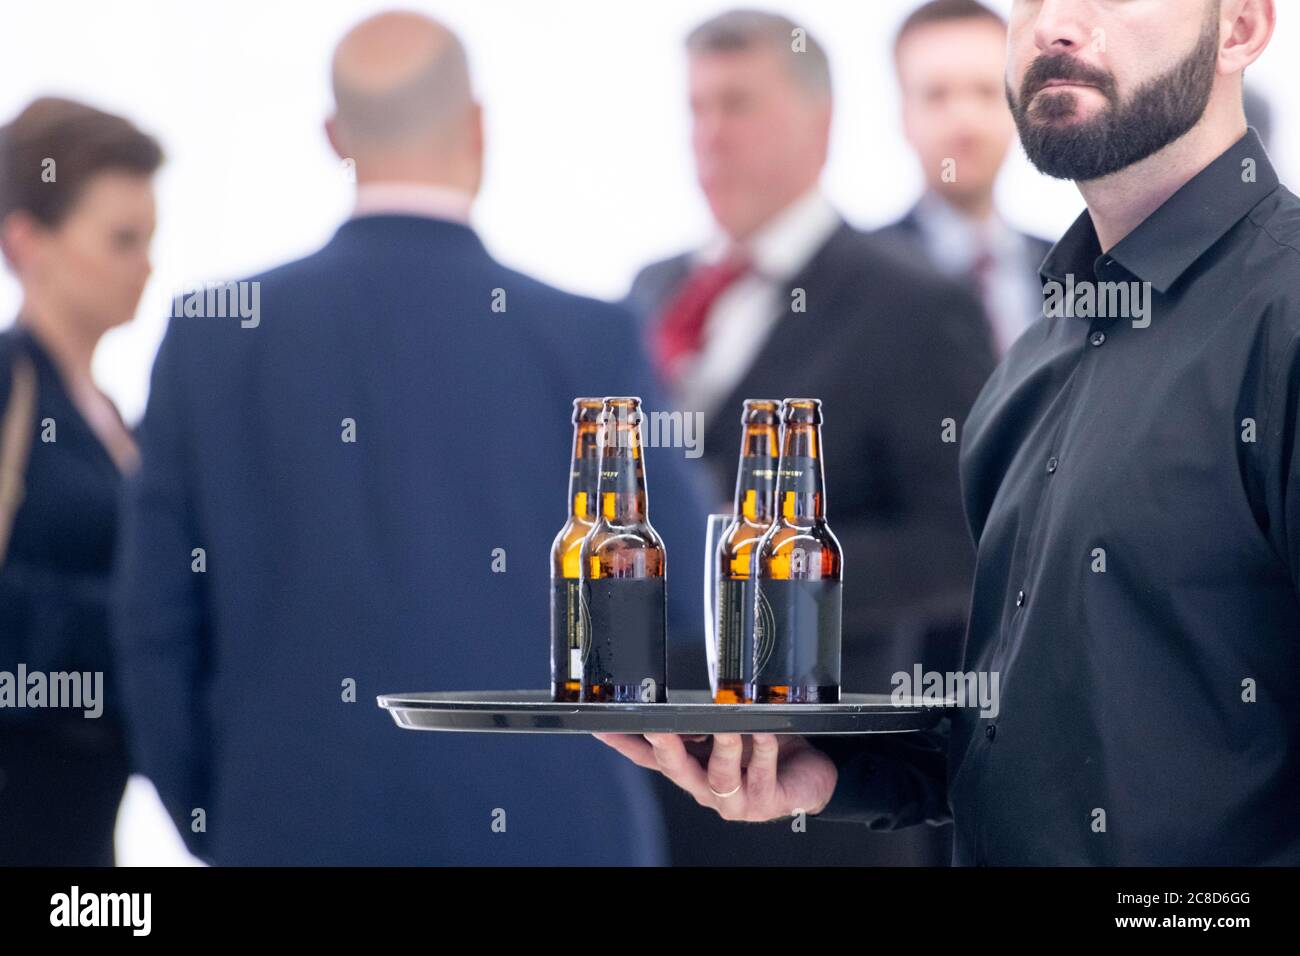 People drinking beer at events receptions and bars Stock Photo